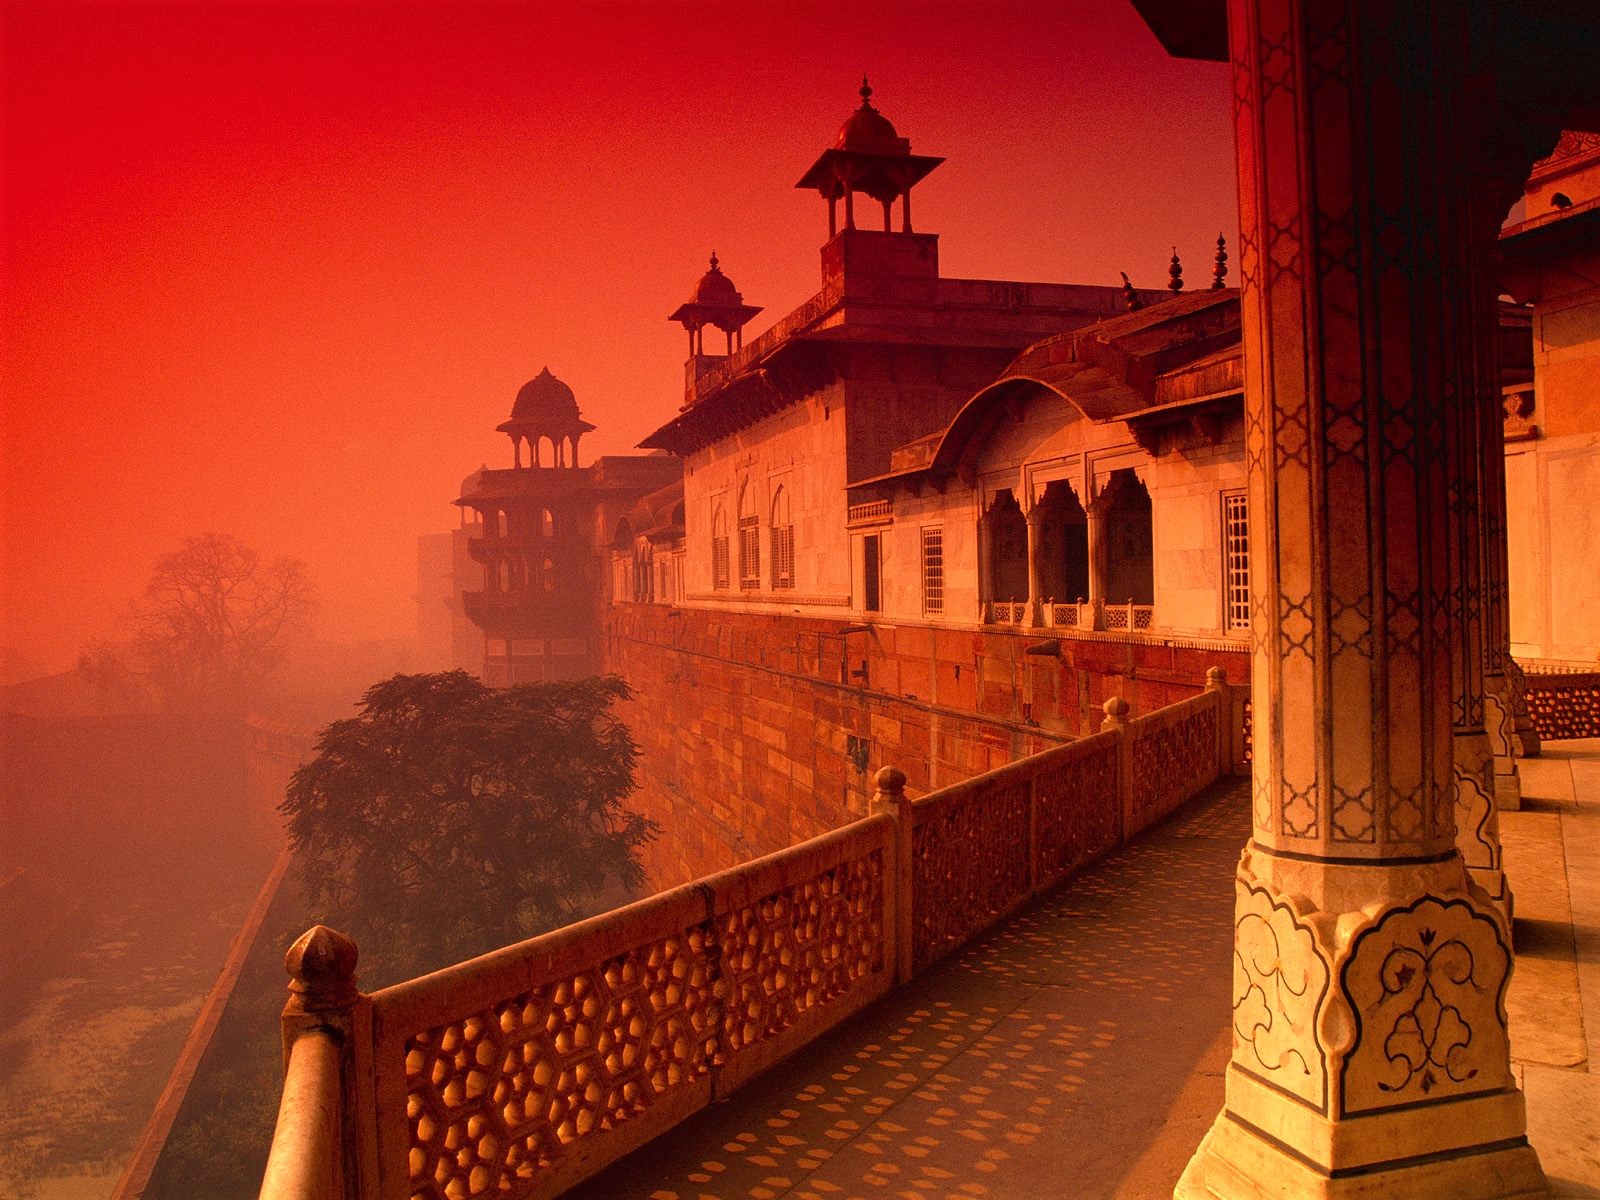 man made, agra fort, architecture, india